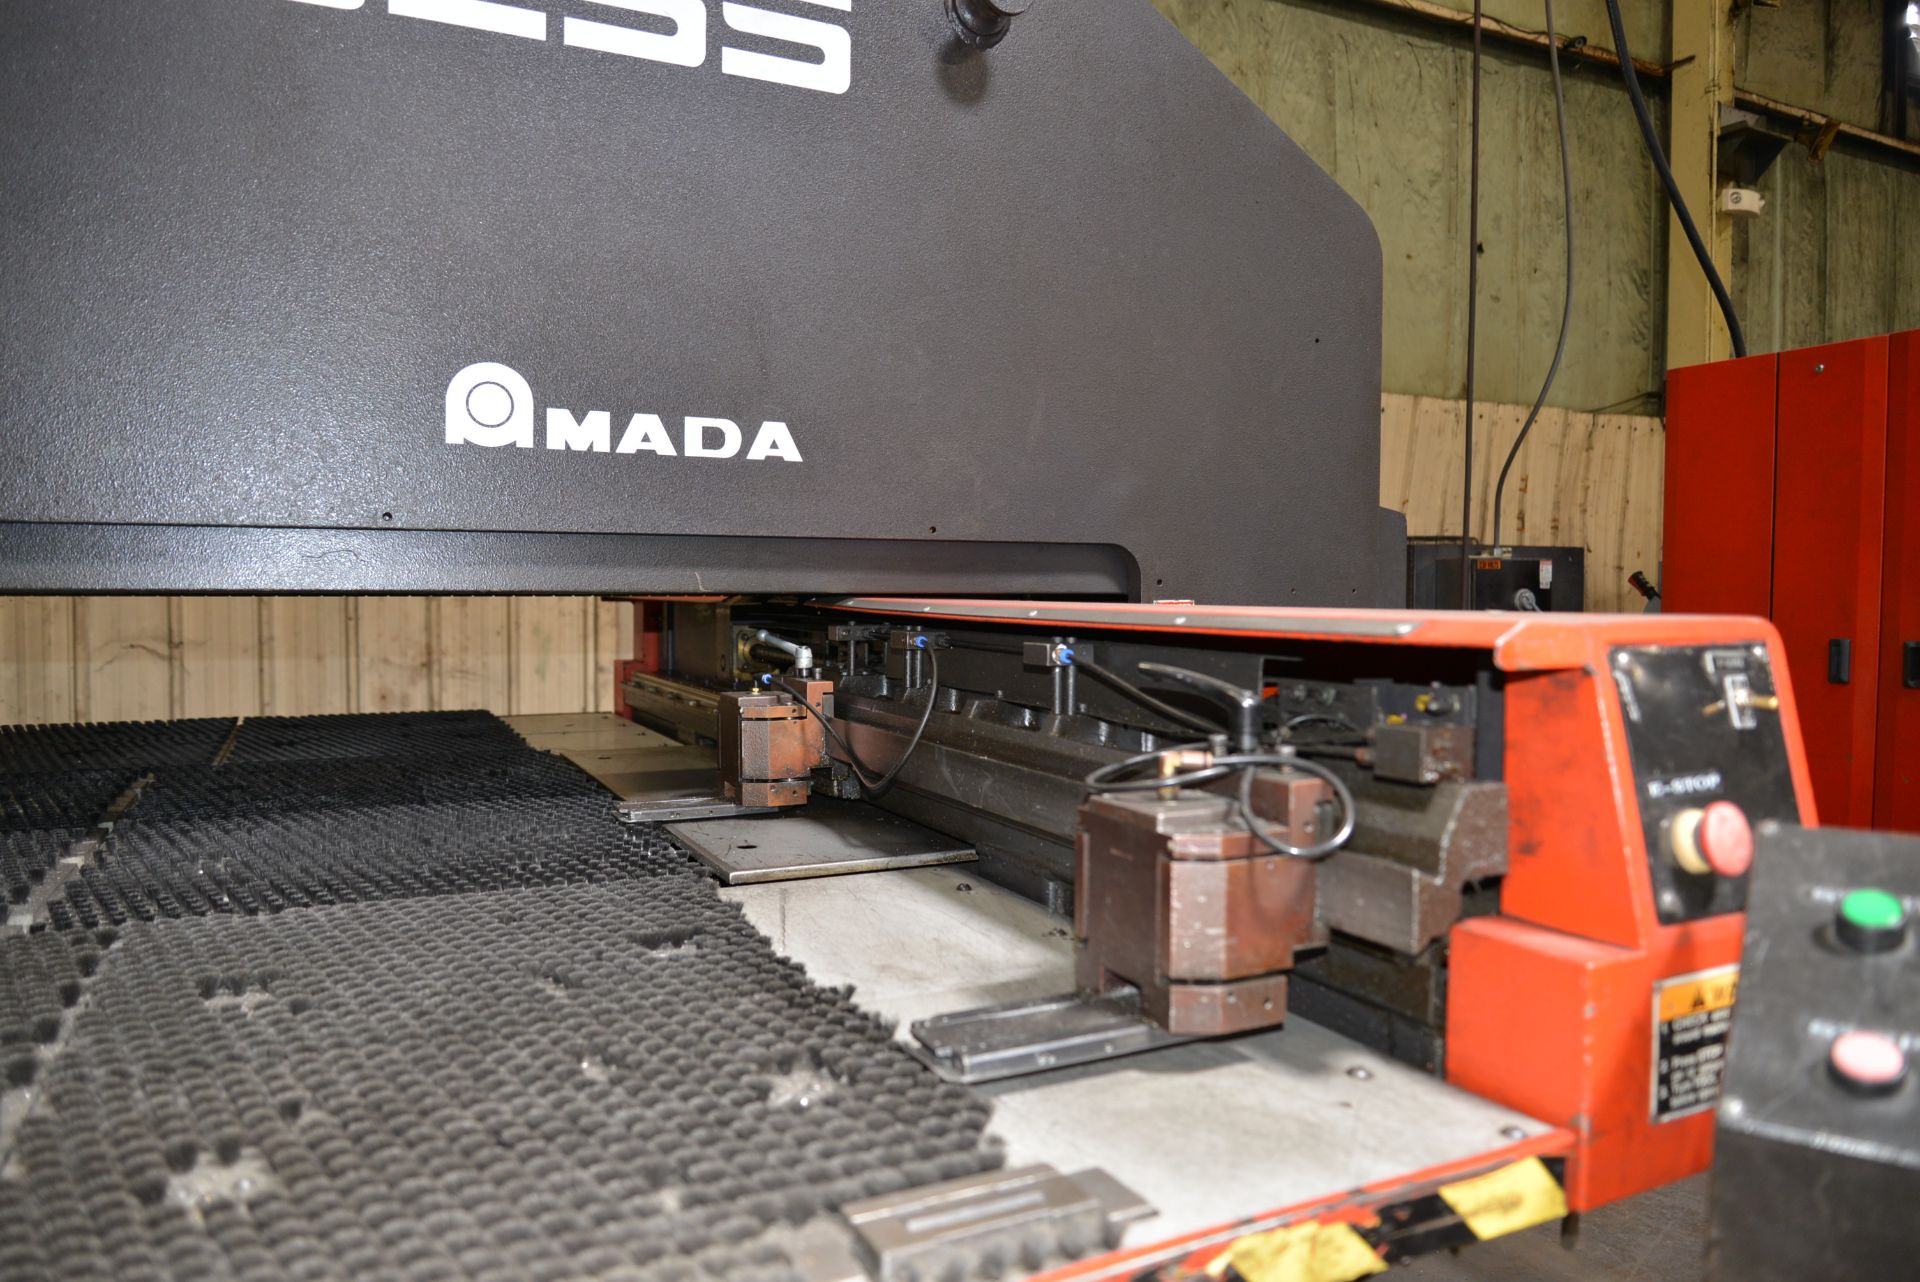 1997 AMADA VIPROS 255 TURRET PUNCH; 20-TON CAPACITY, 31 TURRET STATIONS, POWER REQUIREMENT 22 KVA, - Image 5 of 5